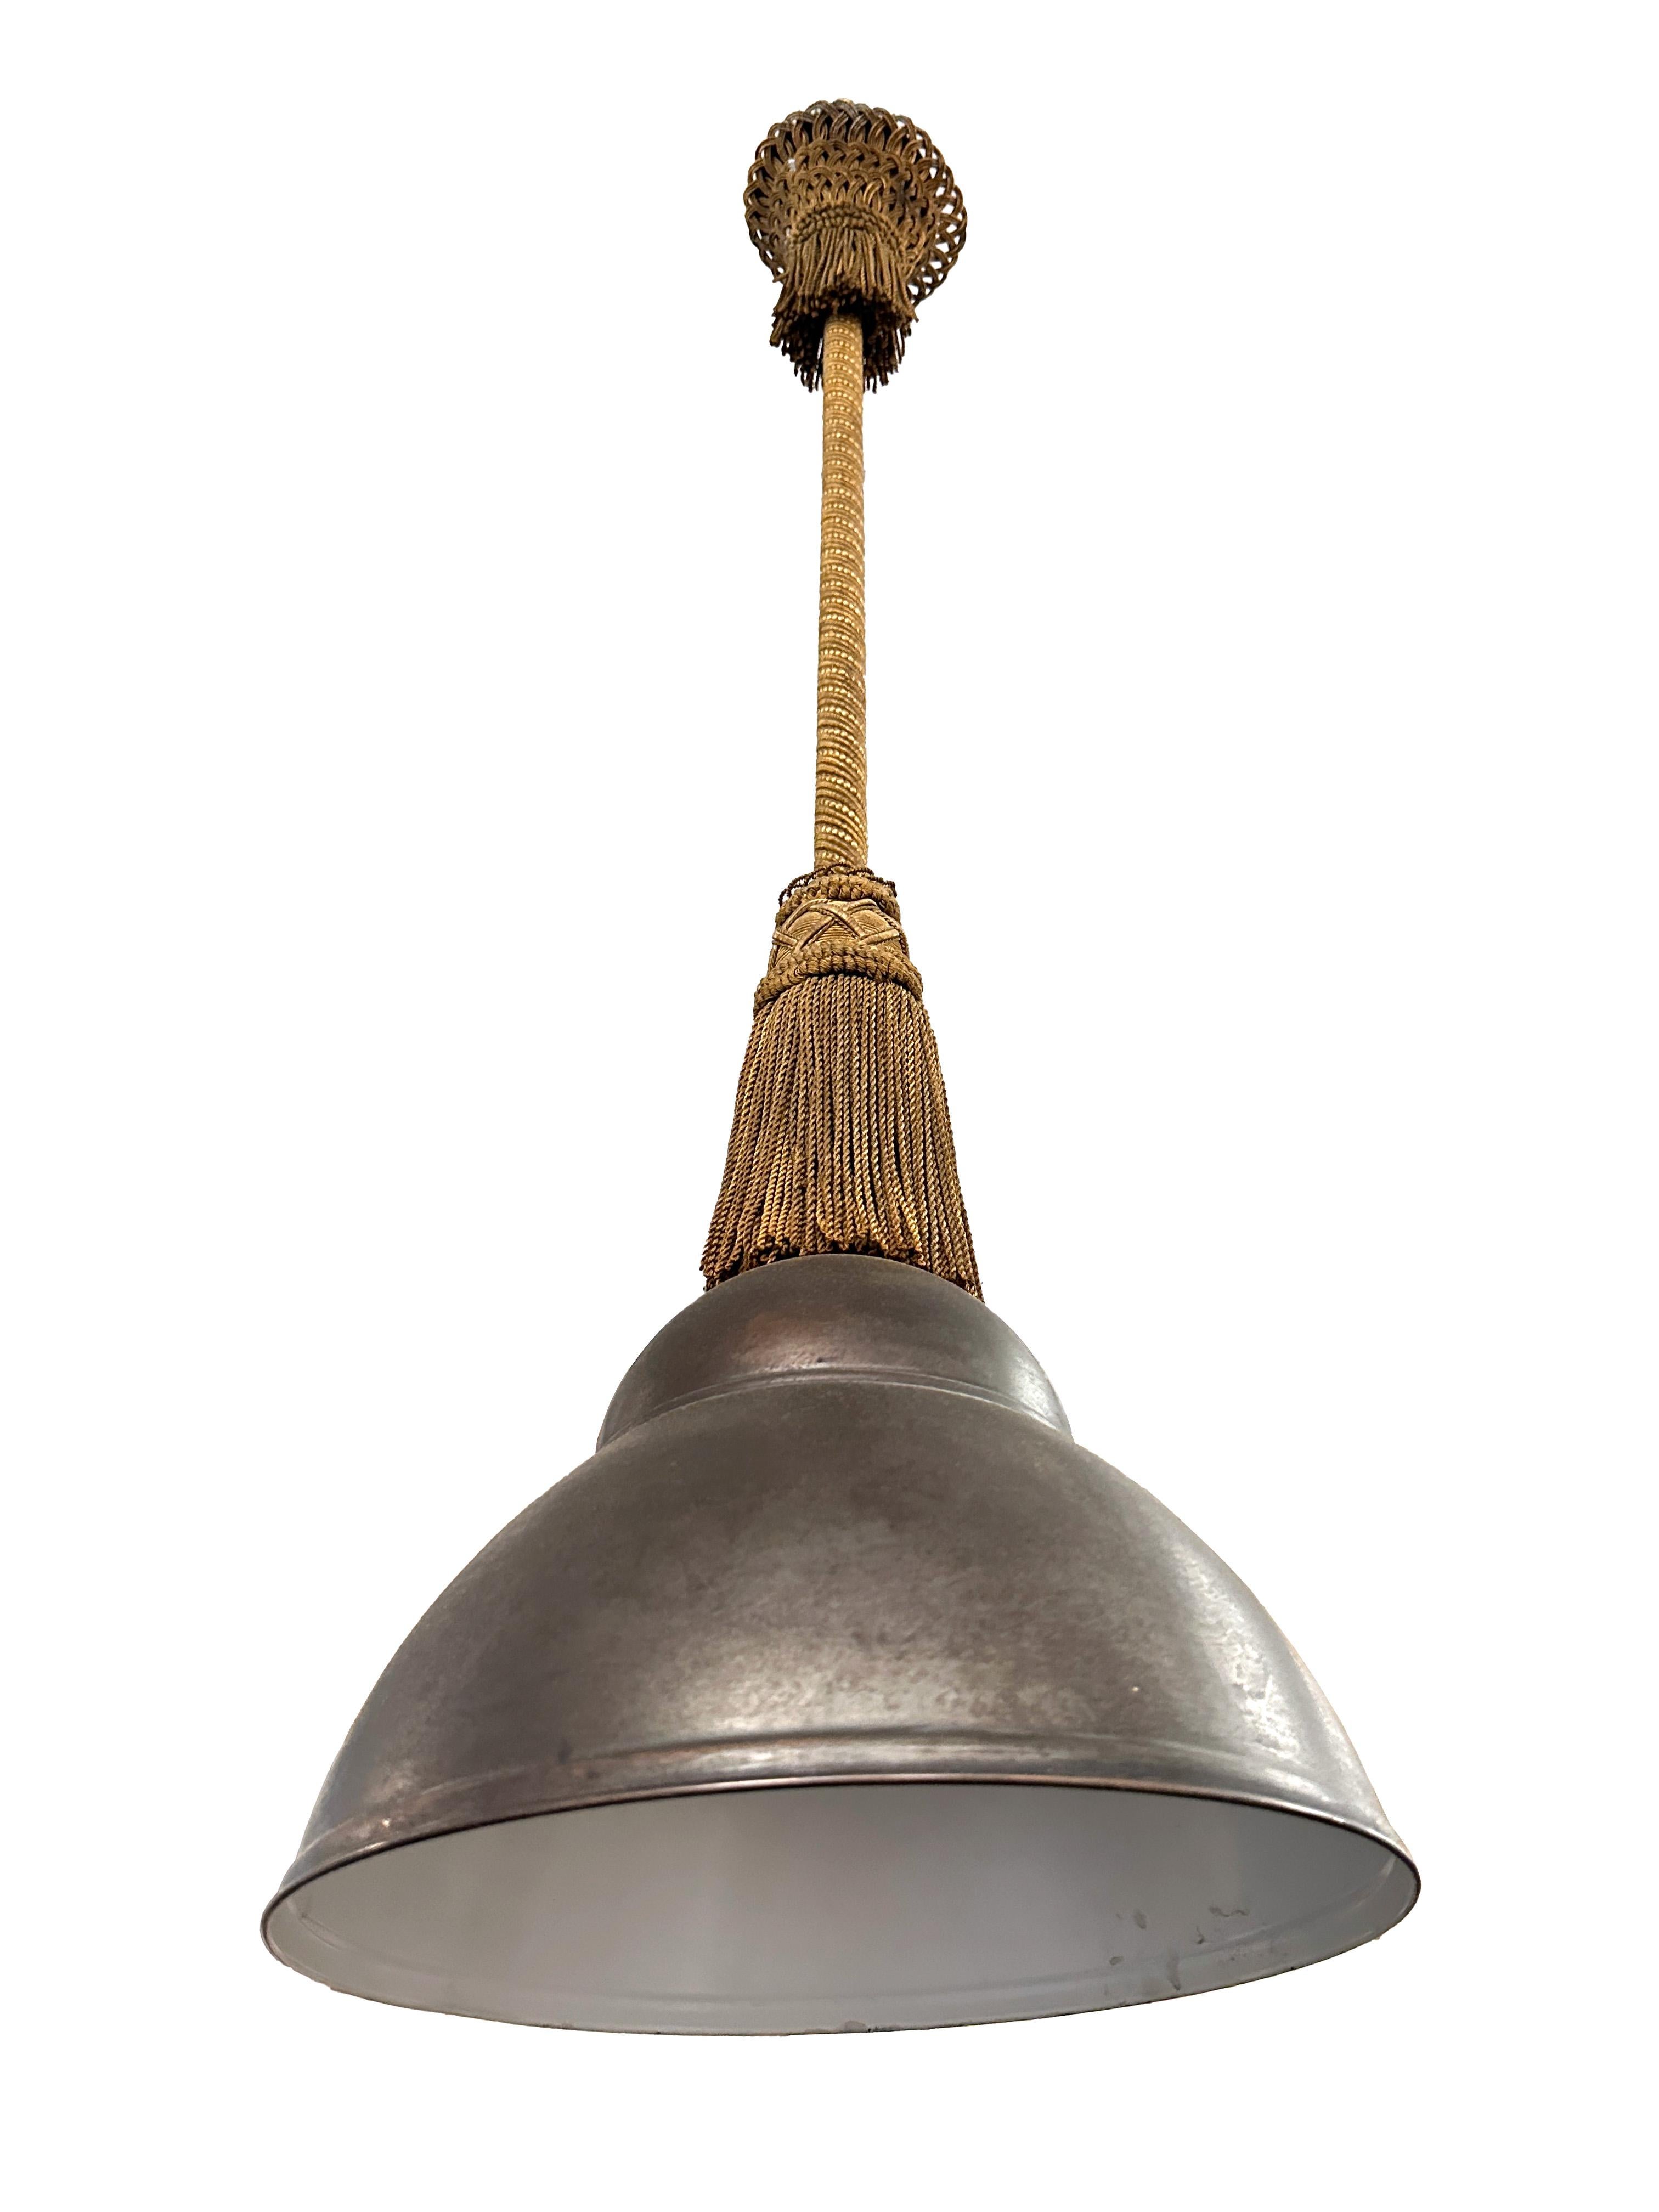 A bell shaped 19th century pair of french pendant lights. Made out of copper with a beautiful woven gold tassel detail with fringes. Very unique pendenat design. 

Property from esteemed interior designer Juan Montoya. Juan Montoya is one of the